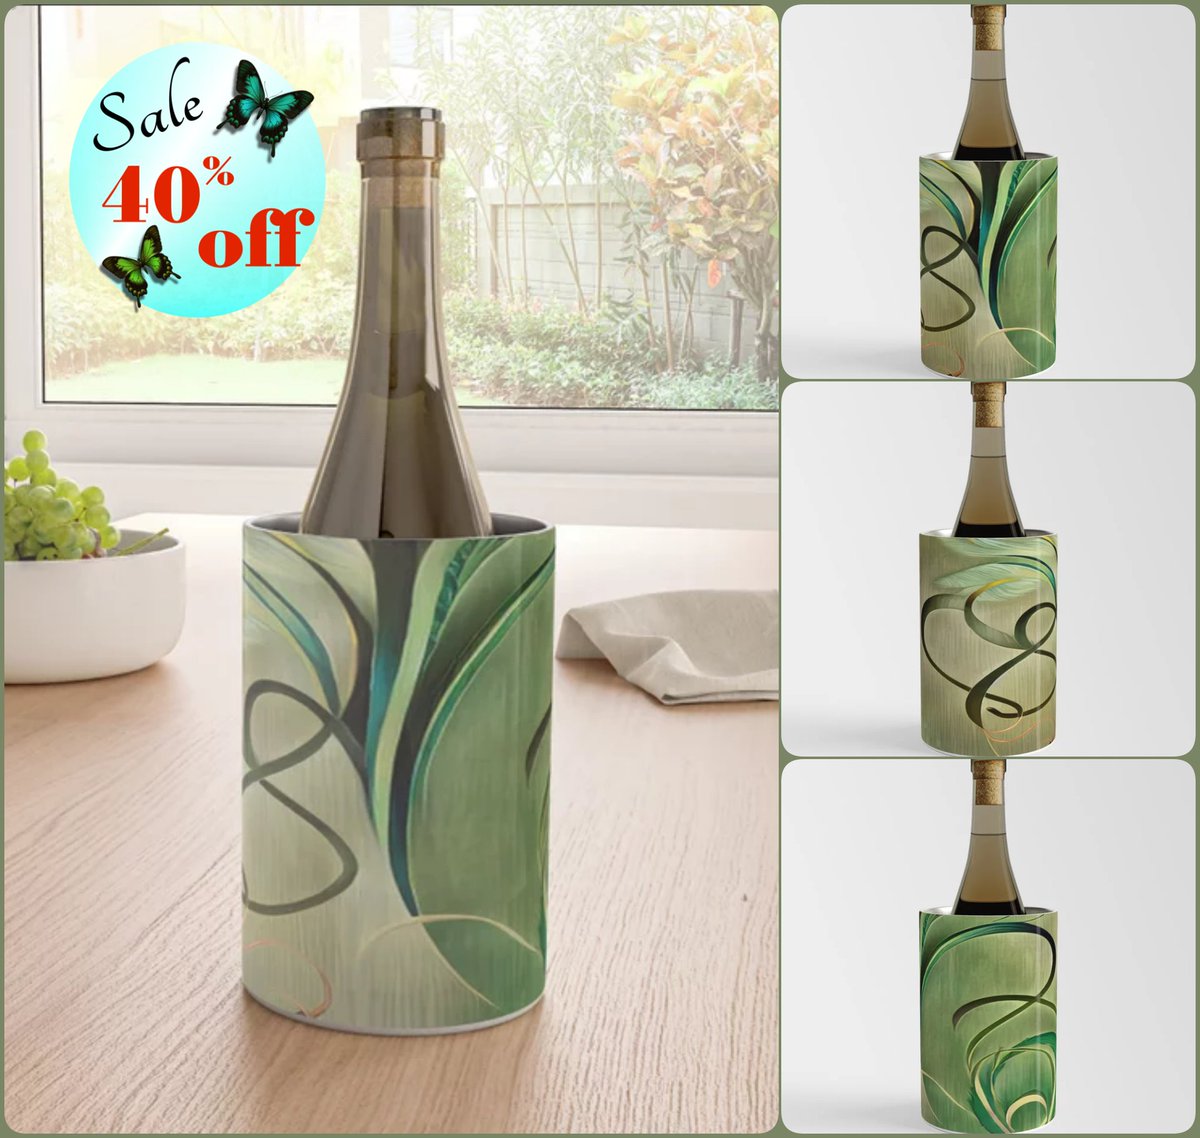 Flash Sale *SALE 40% Off* Today Only** Quiet Ascension Wine Chiller~by Art_Falaxy~ ~Art Exquisite!~ #coasters #gifts #trays #mugs #coffee #society6 #travel #artfalaxy #art #accents #modern #trendy #wine #water #placemats #tablecloths #runners society6.com/product/quiet-…